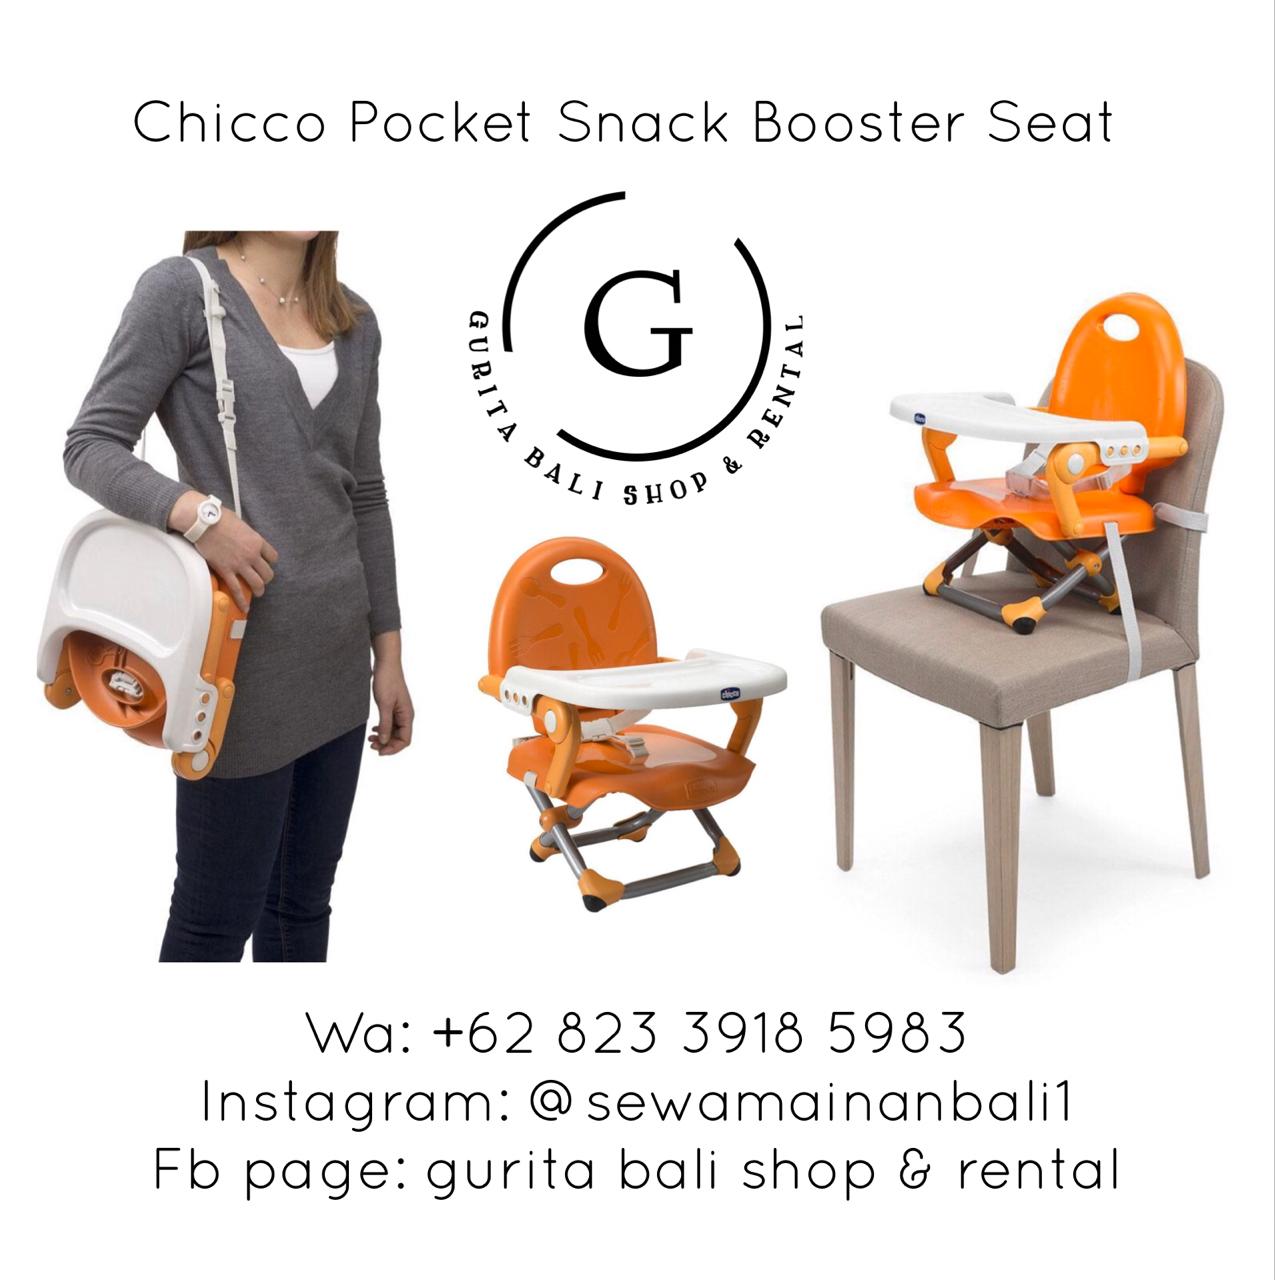 CHICCO POCKET SNACK BOOSTER SEAT